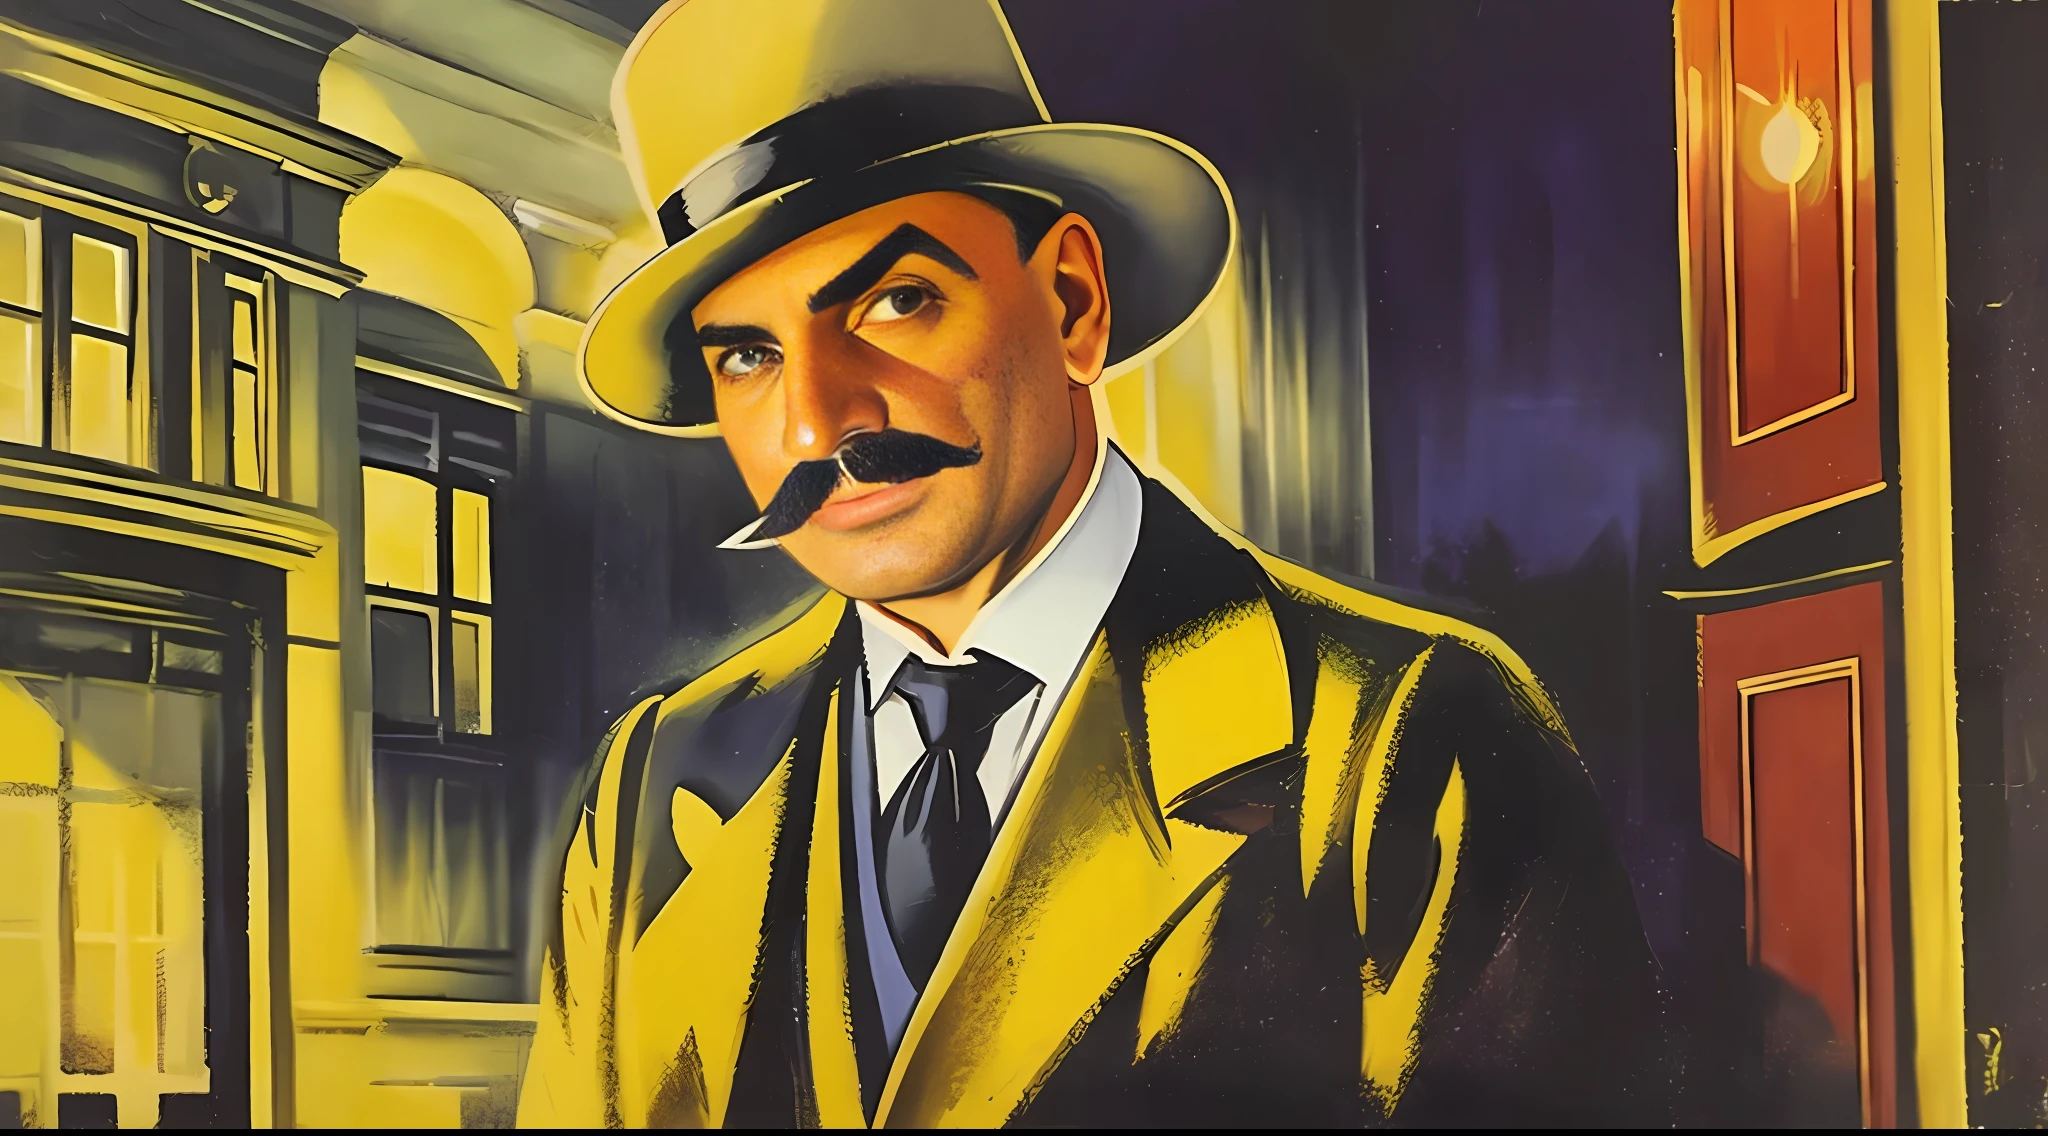 There is a painting of a man with a mustache and a hat - SeaArt AI